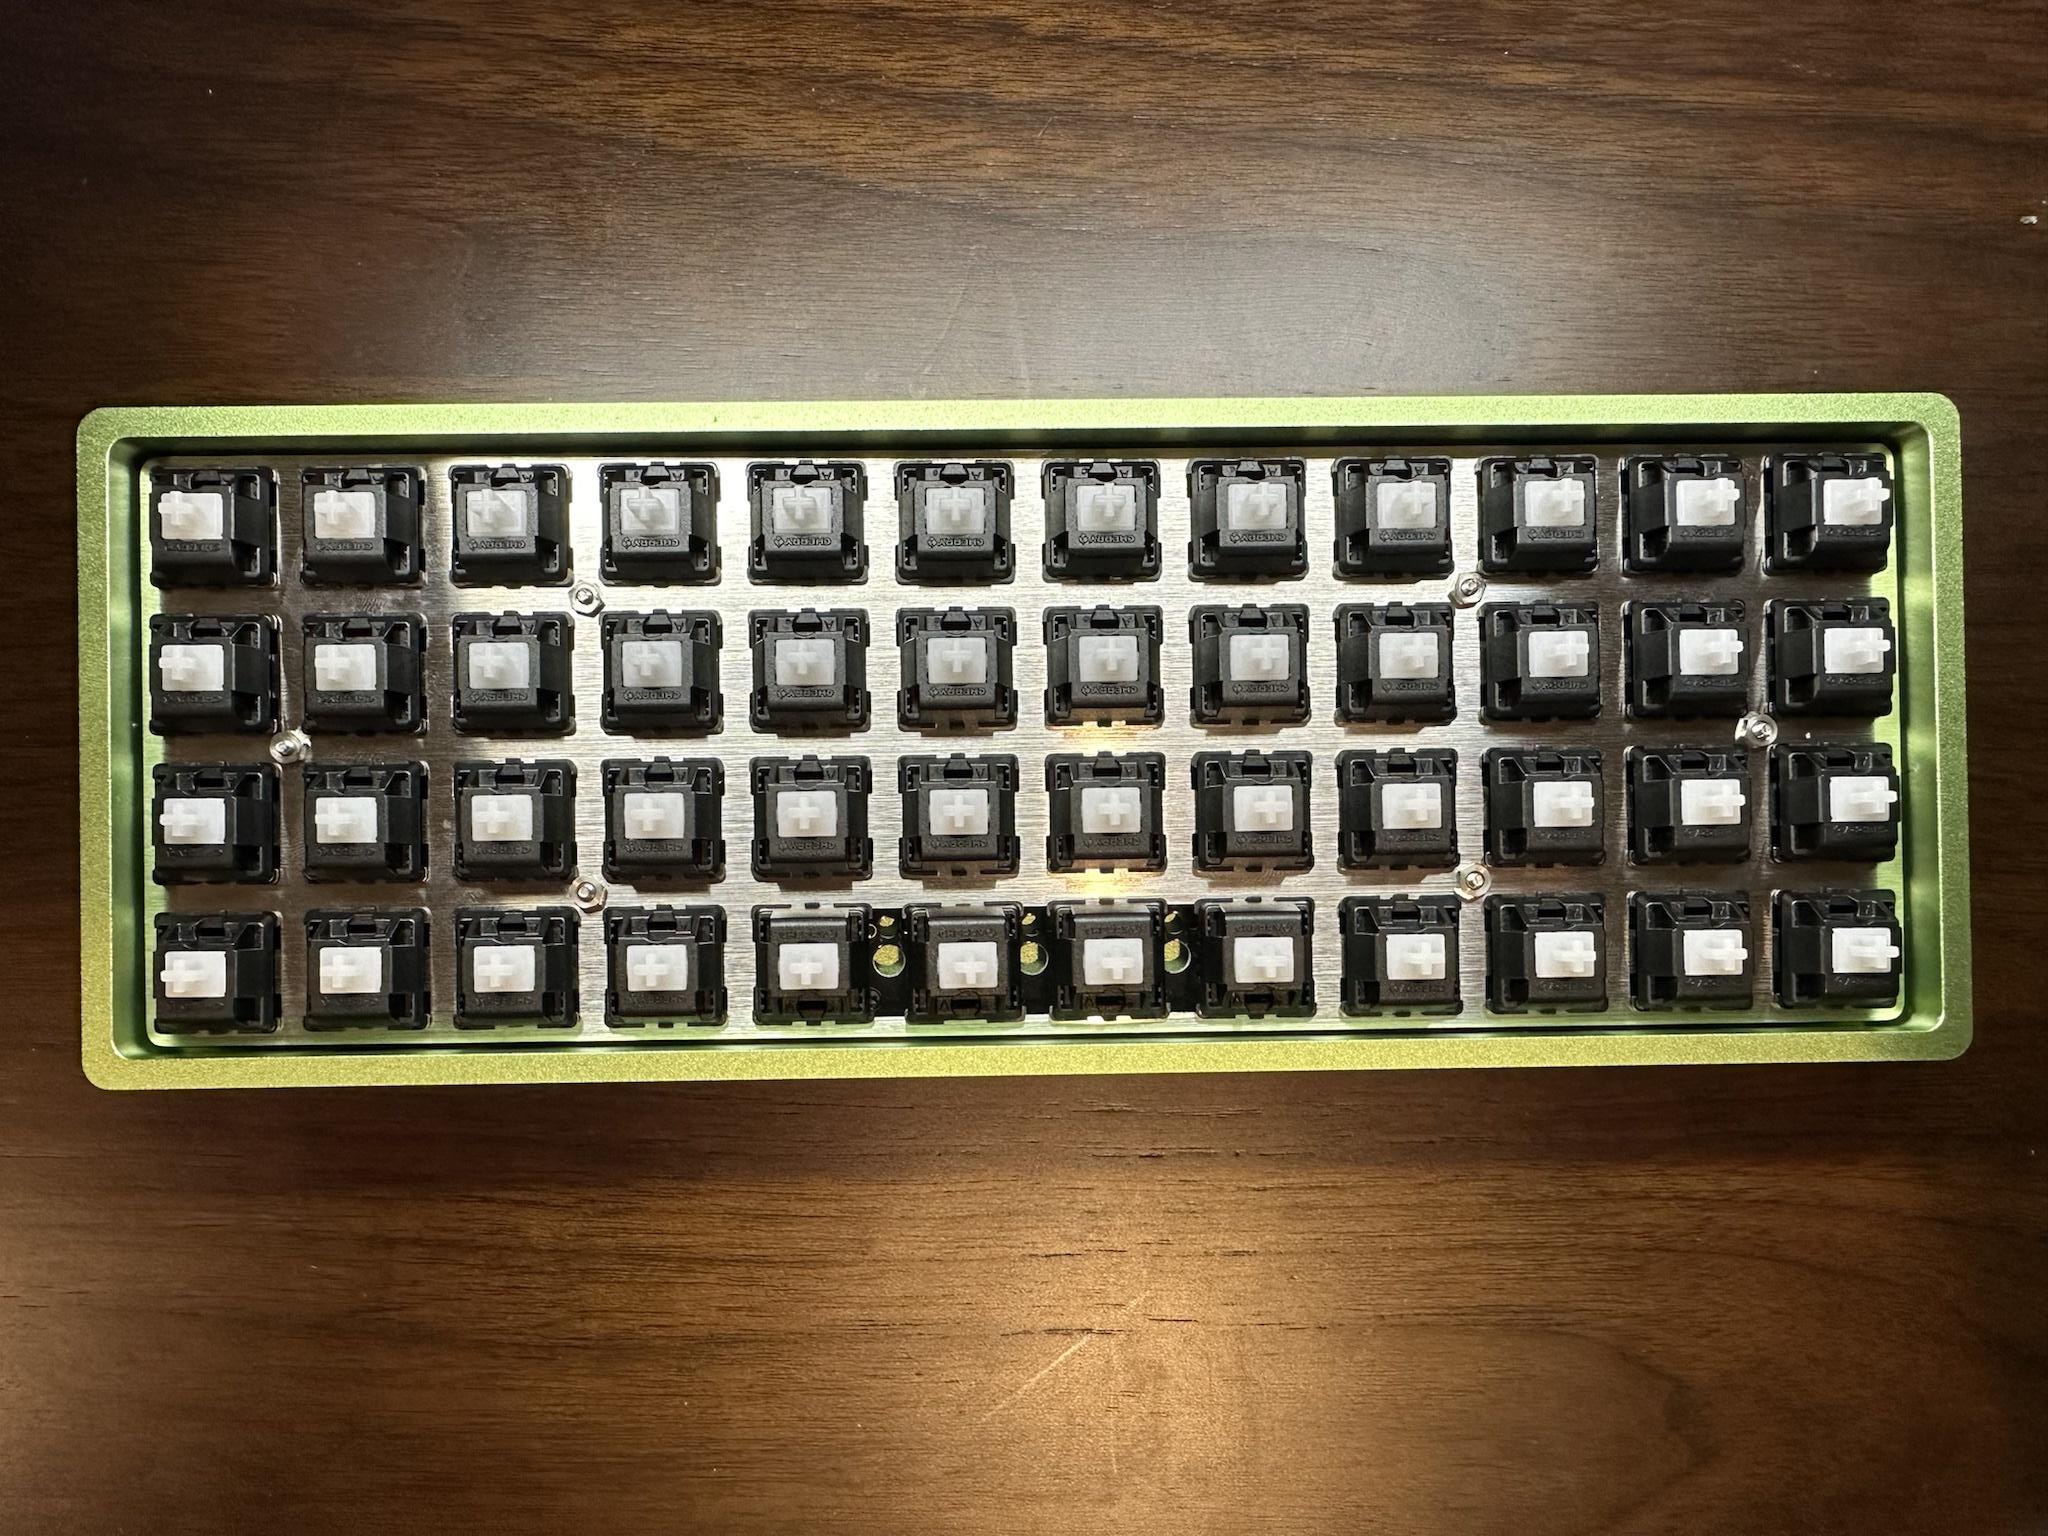 Planck assembled without keycaps